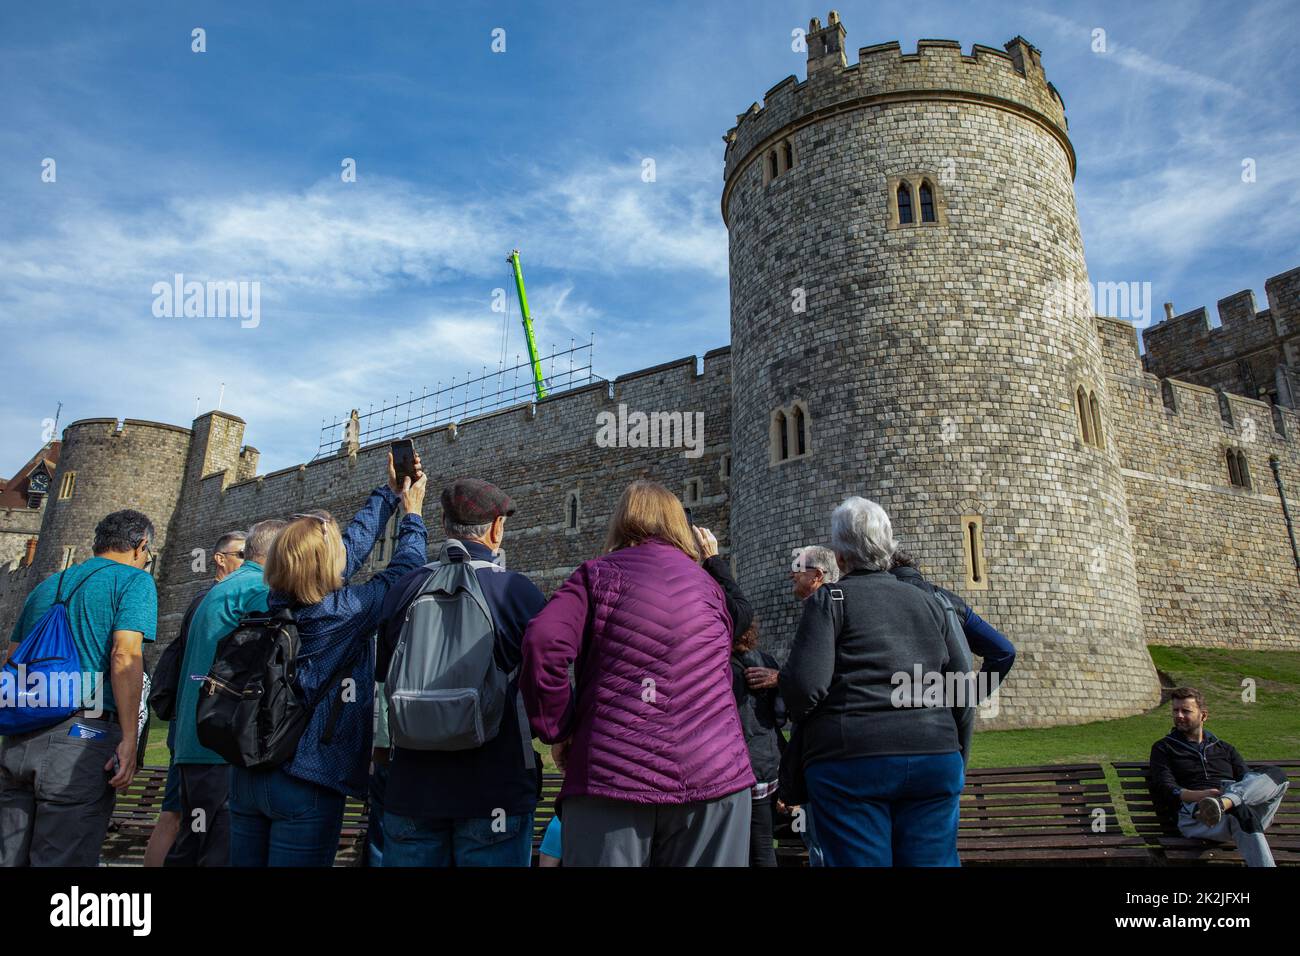 Windsor, UK. 22nd September, 2022. Tourists arrive at Windsor Castle three days after the funeral and committal of Queen Elizabeth II. Queen Elizabeth II, the UK's longest-serving monarch, died at Balmoral aged 96 on 8th September 2022 after a reign lasting 70 years. Credit: Mark Kerrison/Alamy Live News Stock Photo